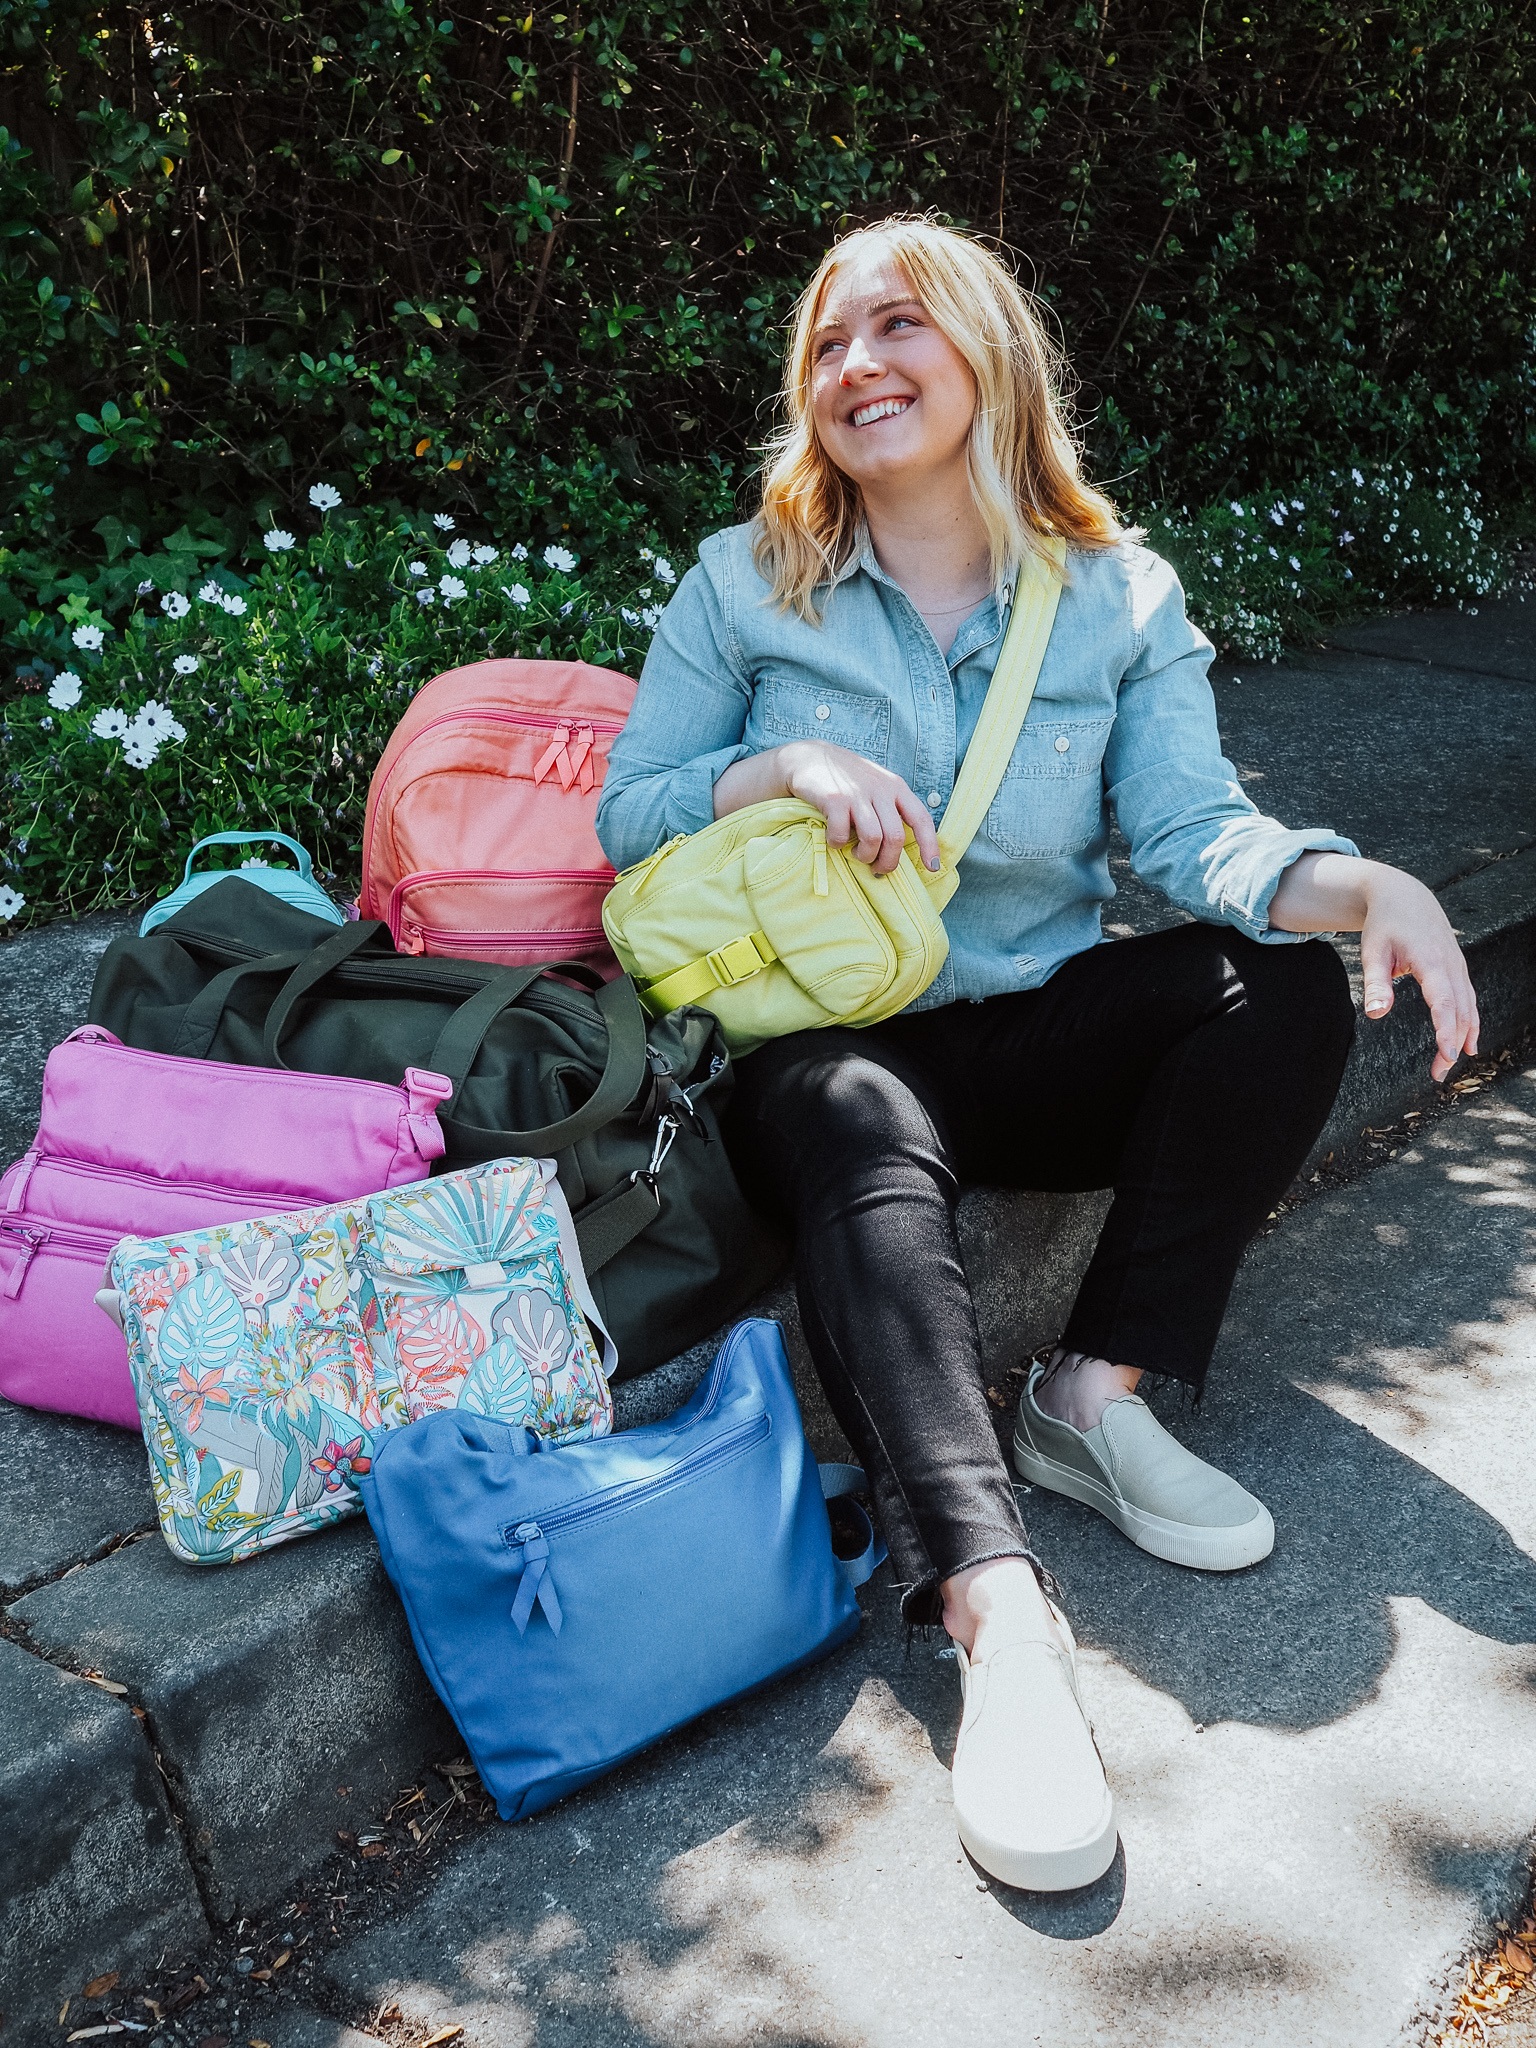 Affordable eco friendly bags can be tough to find! Vera Bradley's new Cotton ReIMAGINED line is packed with eco friendly bags at great prices.